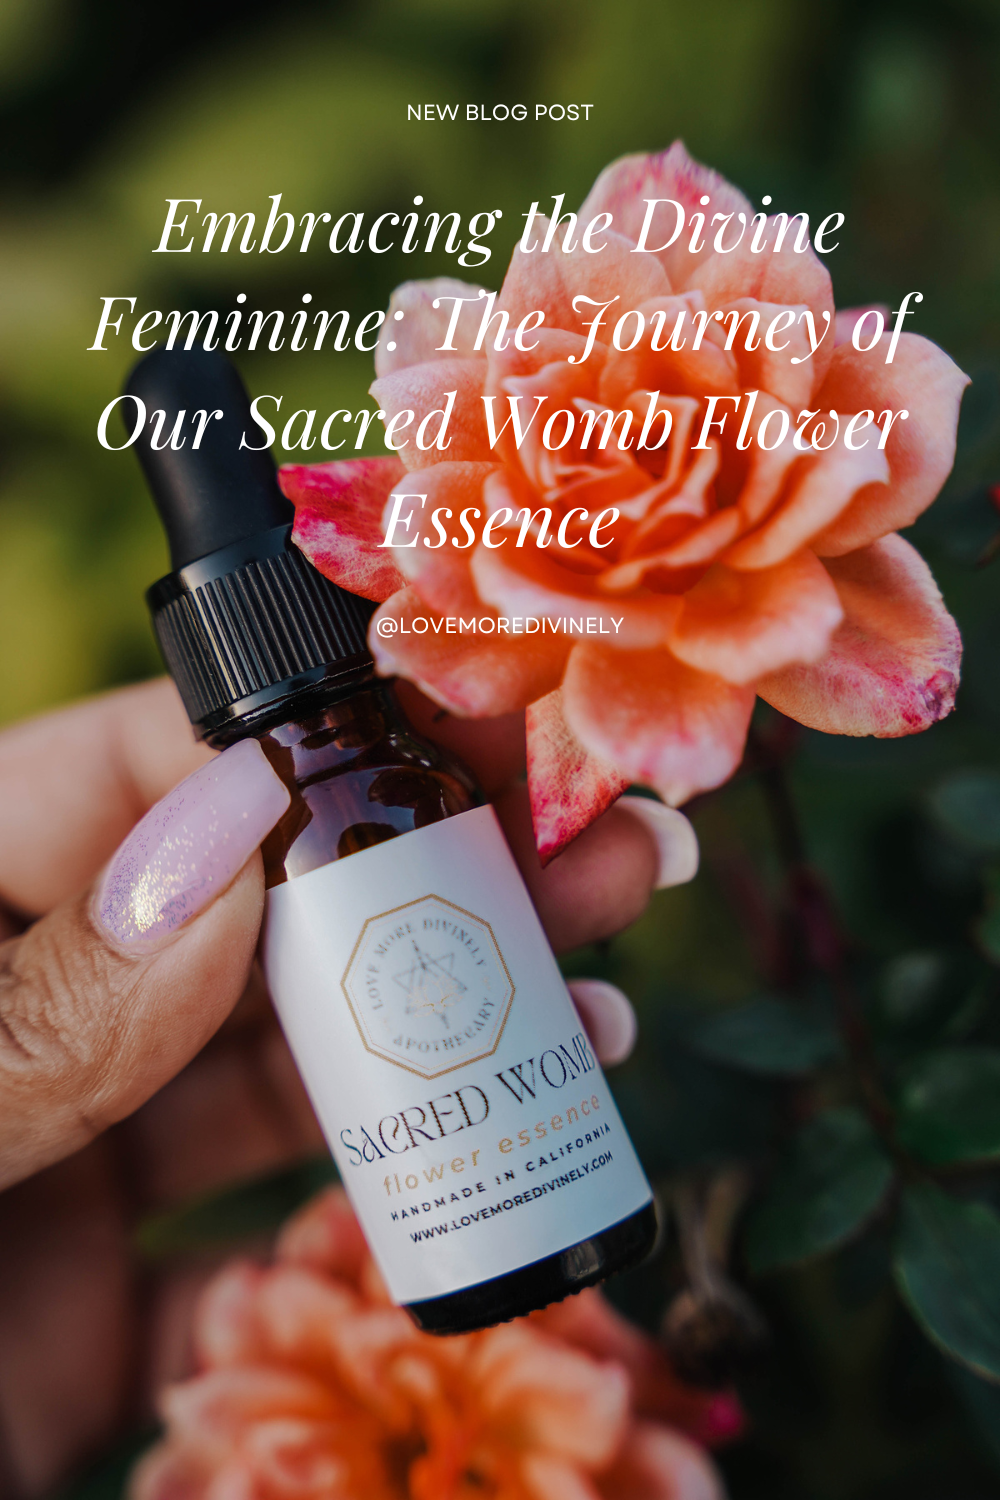 Embracing the Divine Feminine: The Journey of Our Sacred Womb Flower Essence